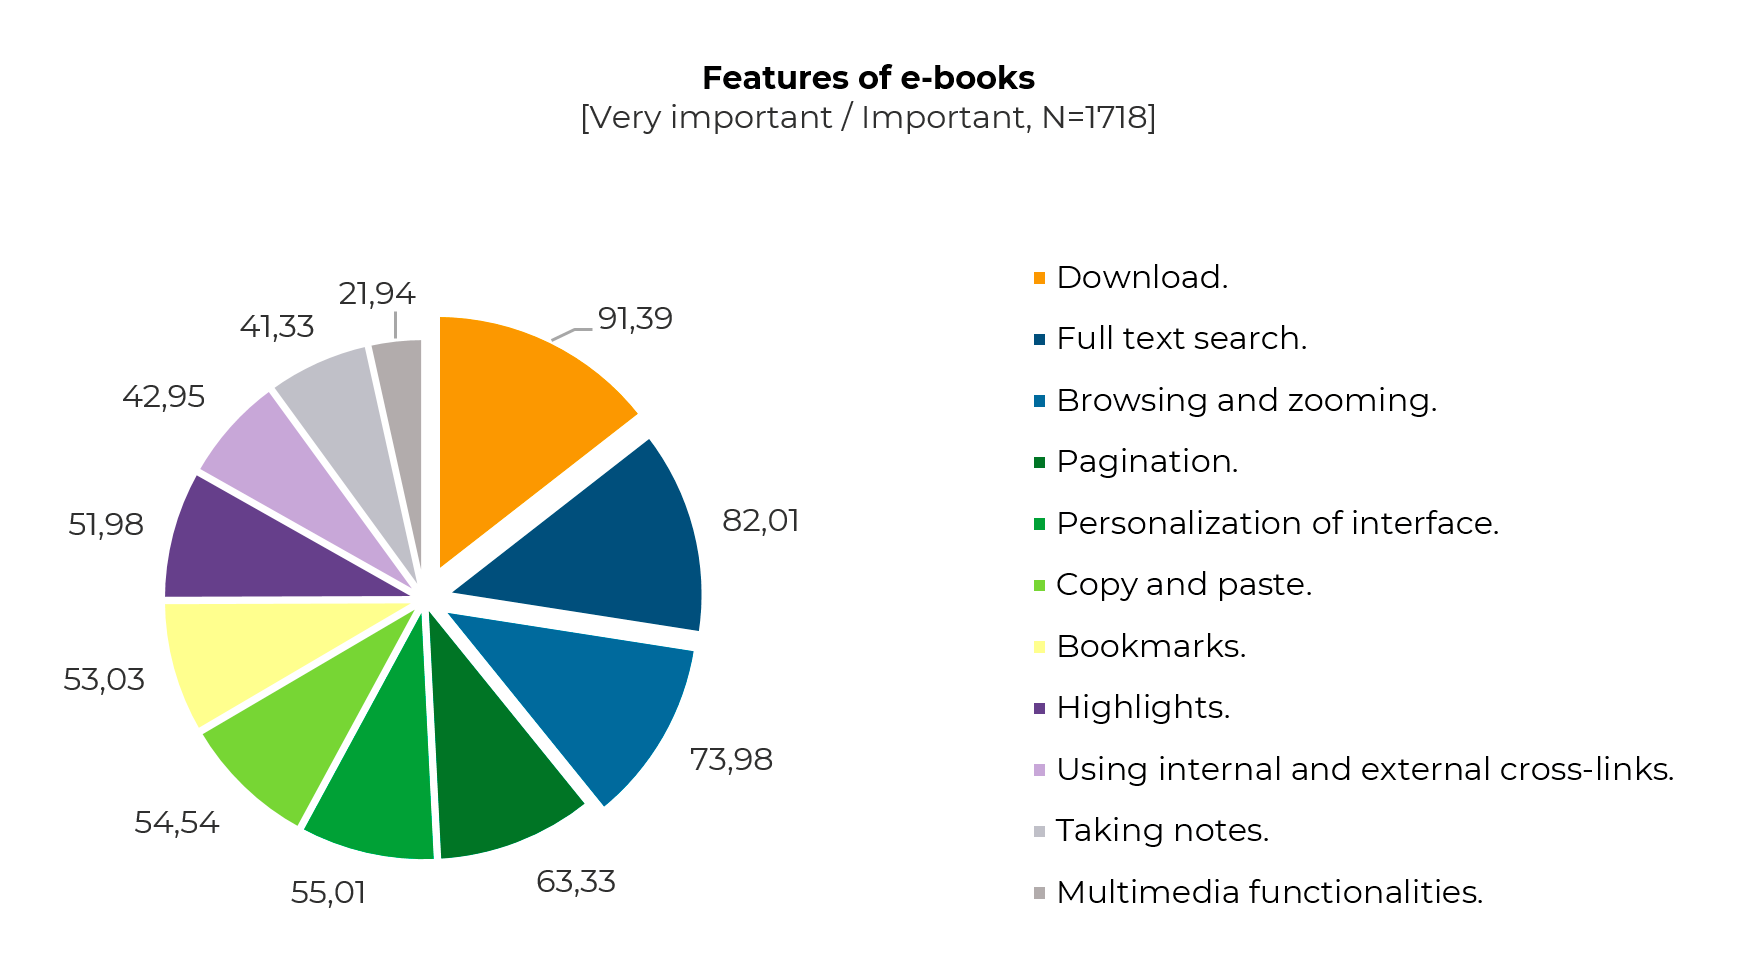 Features of e-books